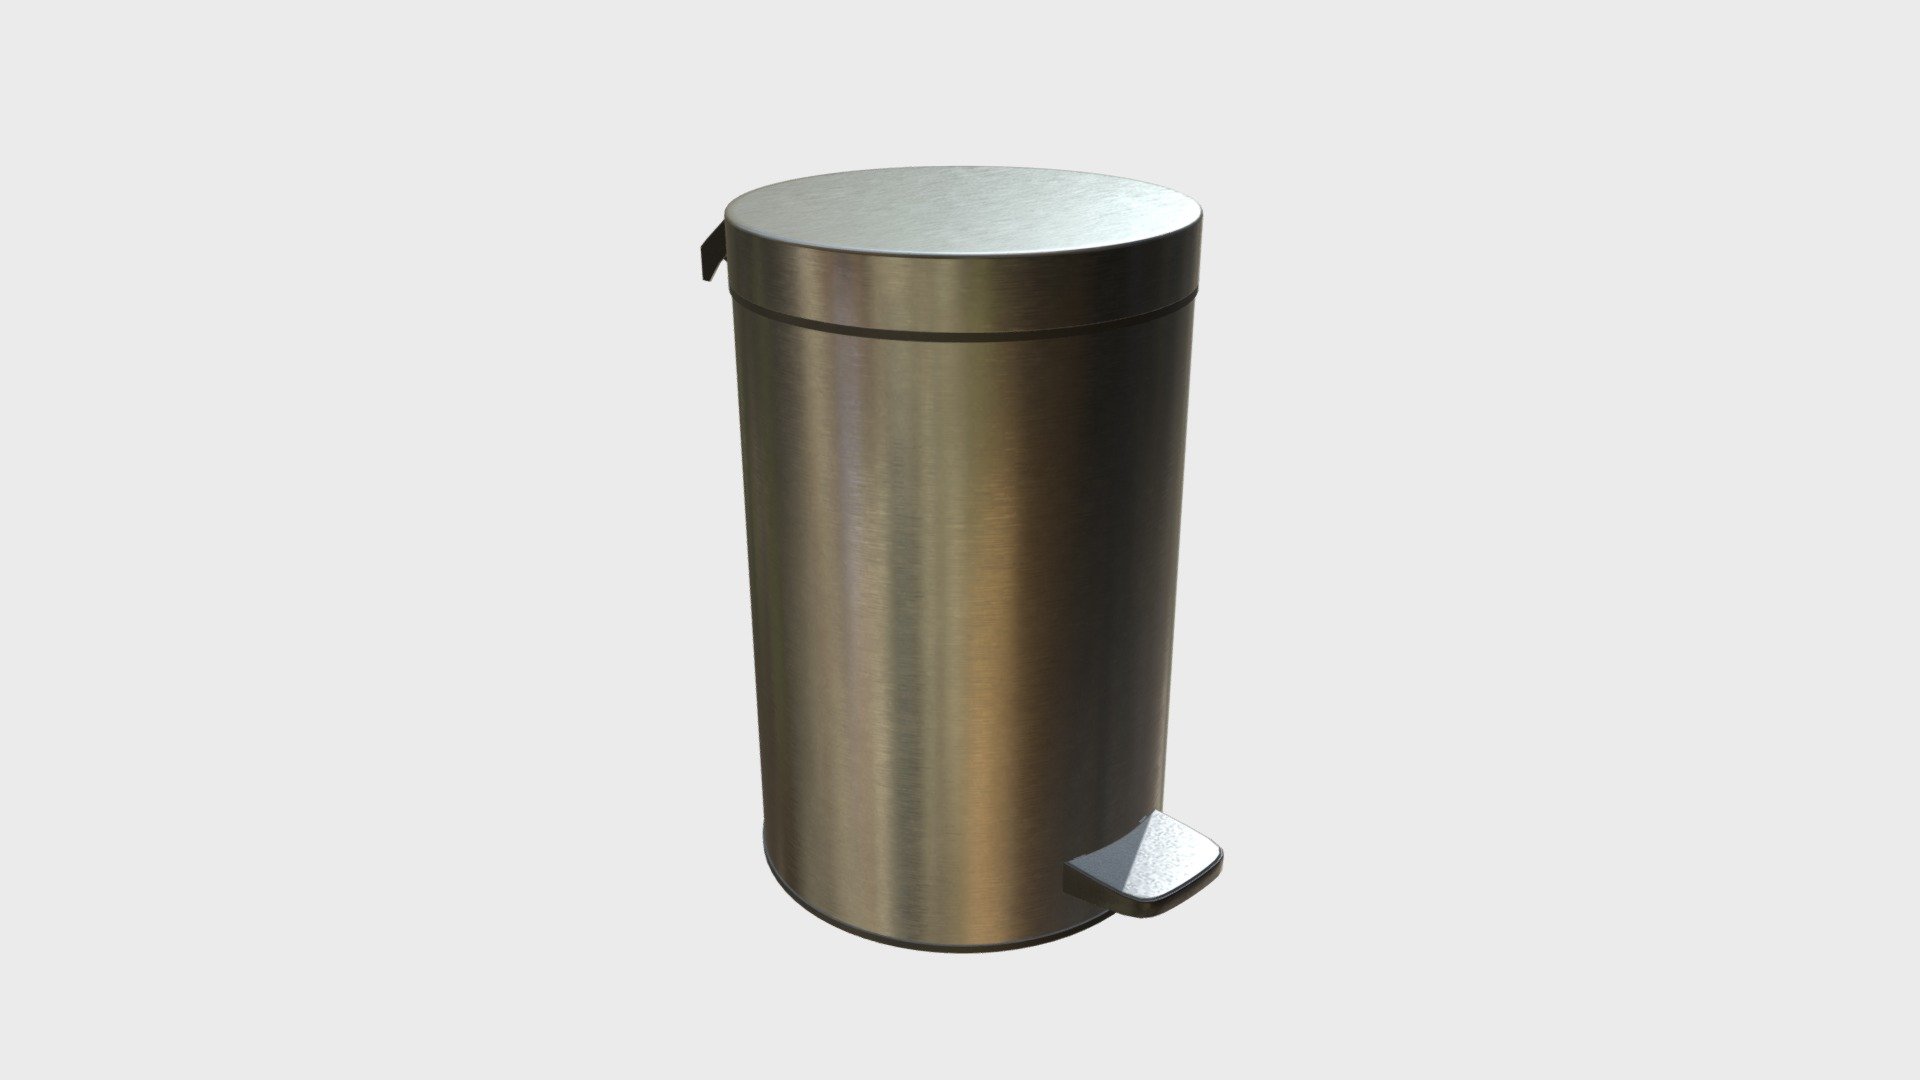 === The following description refers to the additional ZIP package provided with this model ===

Small trash bin 3D Model. 4 individual objects (container, lid, bar, pedal), NOT RIGGED, sharing the same non overlapping UV Layout map, Material and PBR Textures set. Production-ready 3D Model, with PBR materials, textures, non overlapping UV Layout map provided in the package.

Quads only geometries (no tris/ngons).

Formats included: FBX, OBJ; scenes: BLEND (with Cycles / Eevee PBR Materials and Textures); other: 16-bit PNGs with Alpha.

4 Objects (meshes), 1 PBR Material, UV unwrapped (non overlapping UV Layout map provided in the package); UV-mapped Textures.

UV Layout maps and Image Textures resolutions: 2048x2048; PBR Textures made with Substance Painter.

Polygonal, QUADS ONLY (no tris/ngons); 11254 vertices, 11220 quad faces (22440 tris).

Real world dimensions; scene scale units: cm in Blender 3.6.1 LTS (that is: Metric with 0.01 scale).

Uniform scale object (scale applied in Blender 3.6.1 LTS) 3d model